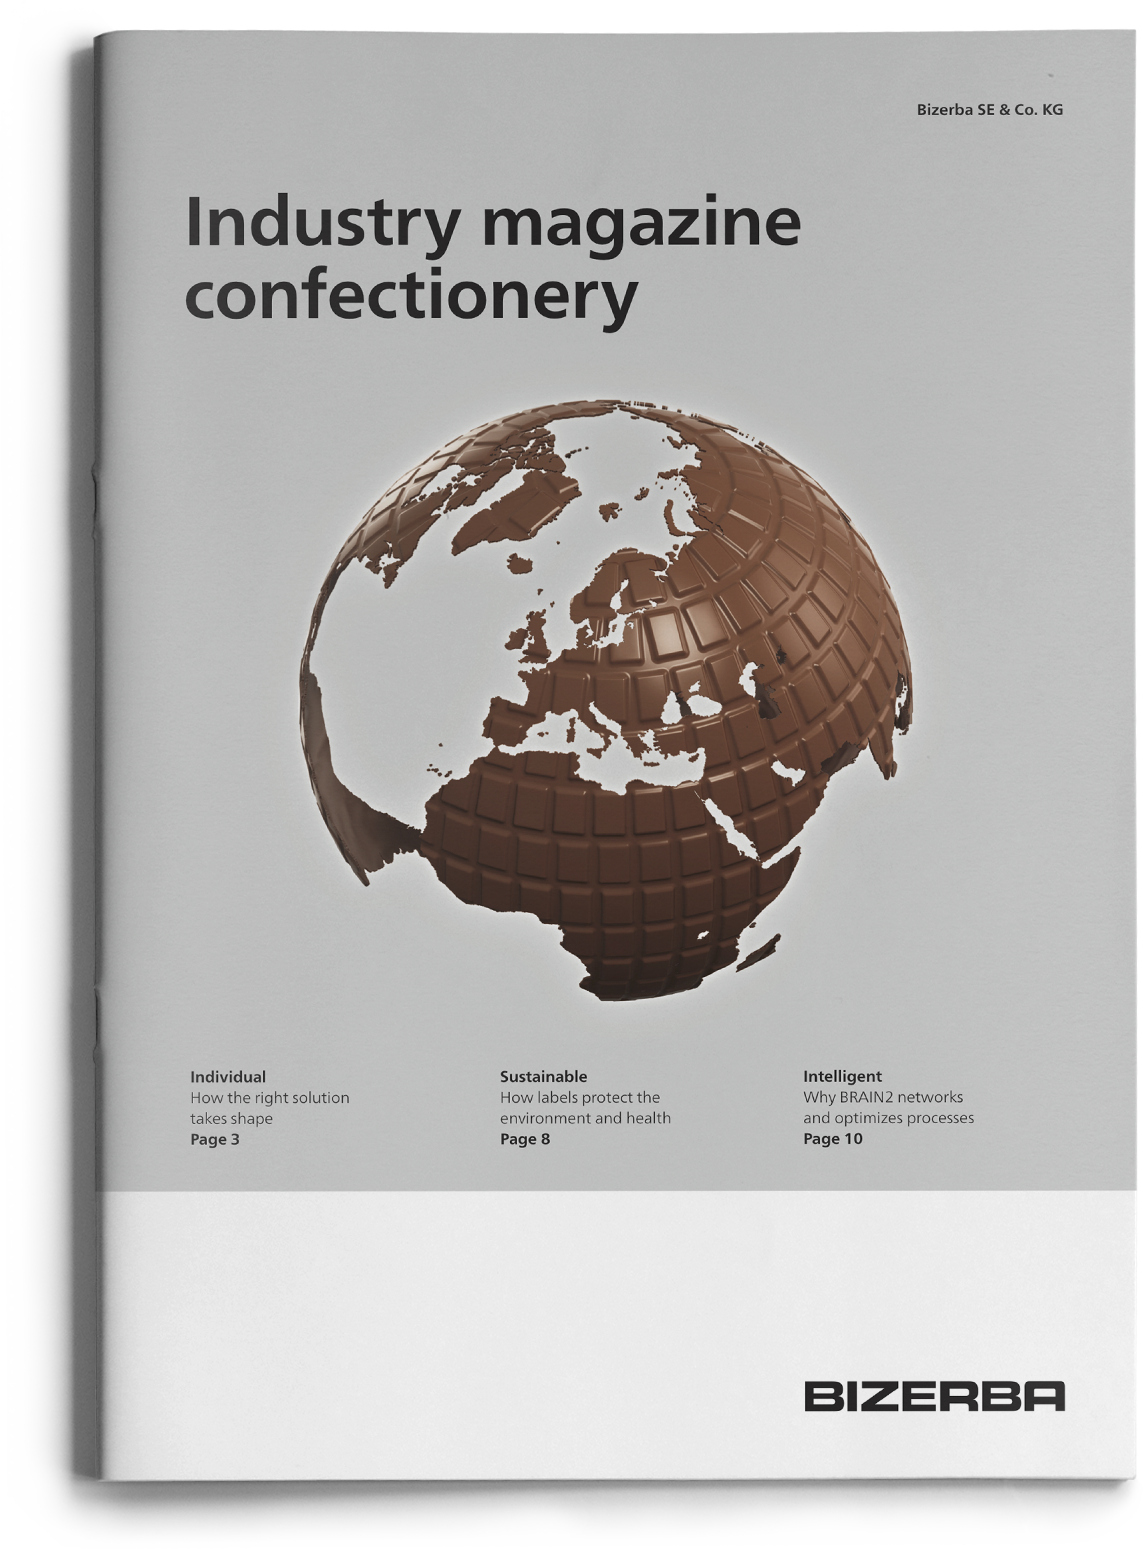 Industry magazine confectionery